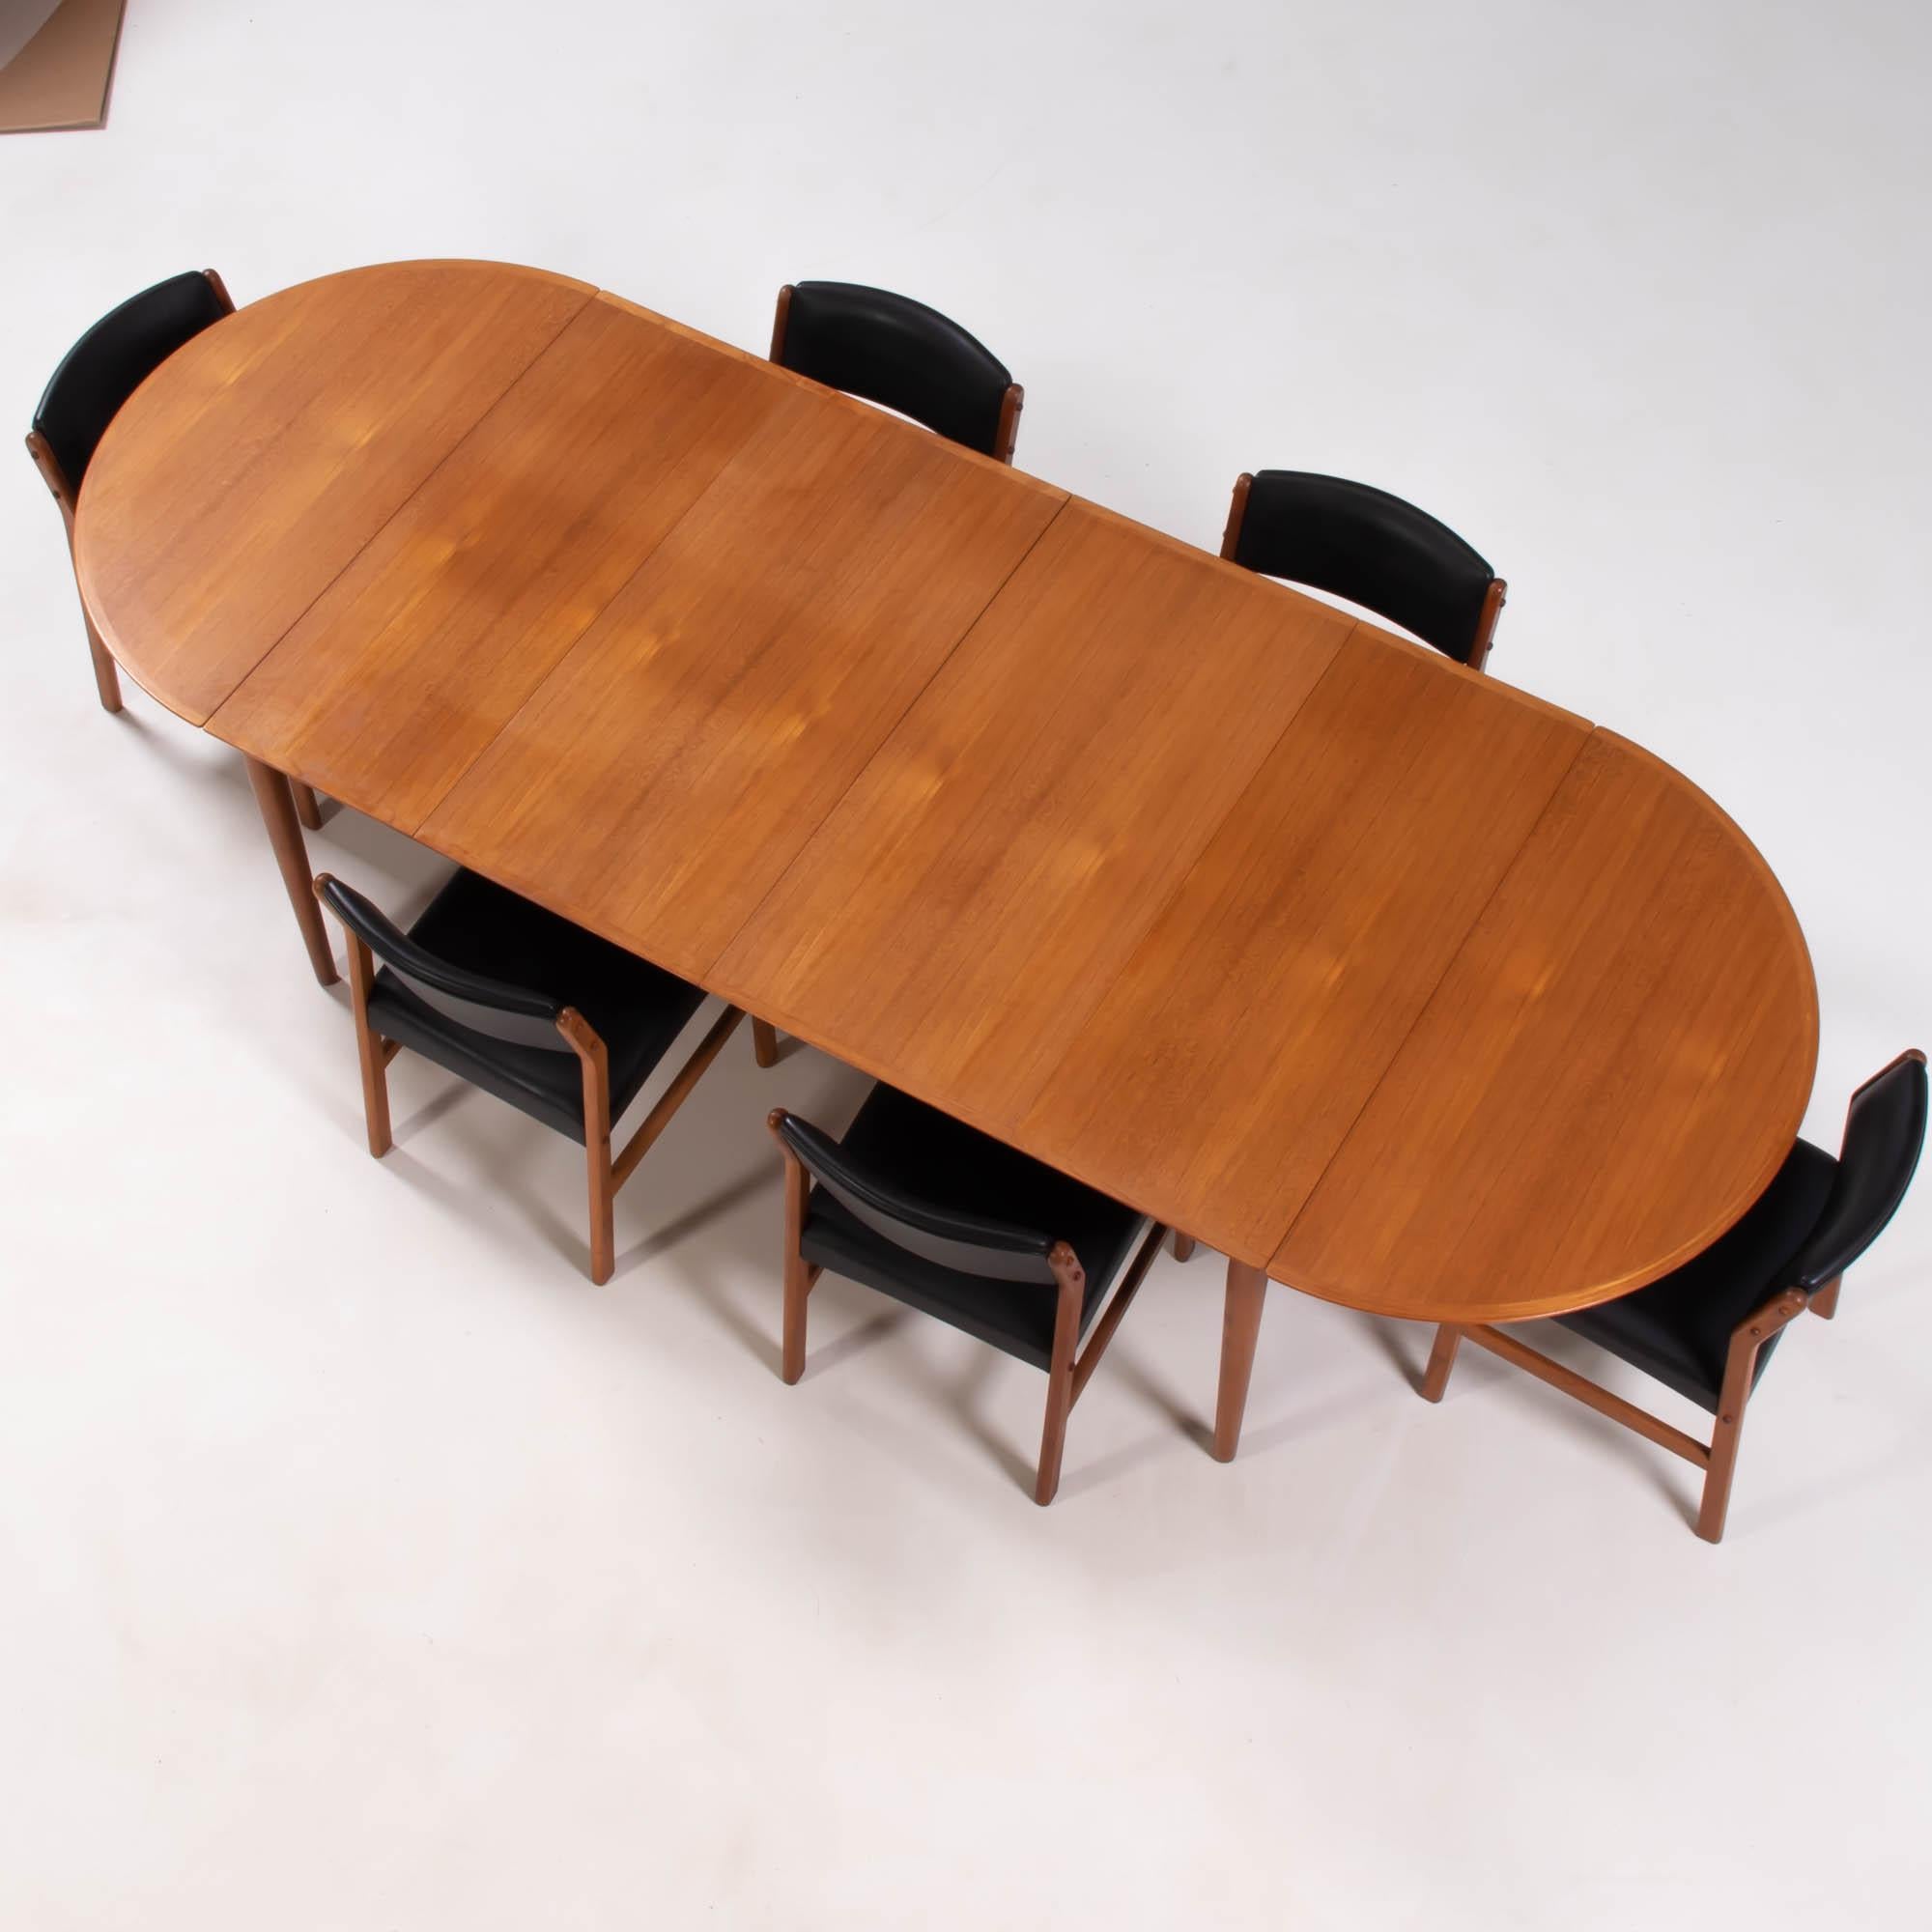 Designed by Arne Vodder for the Danish manufacturer Sibast, the 227 dining table and chairs are a fantastic example of Mid-Century Modern design.

Table
Constructed from wood, the table has a drop leaf panel at each end, allowing the table to be